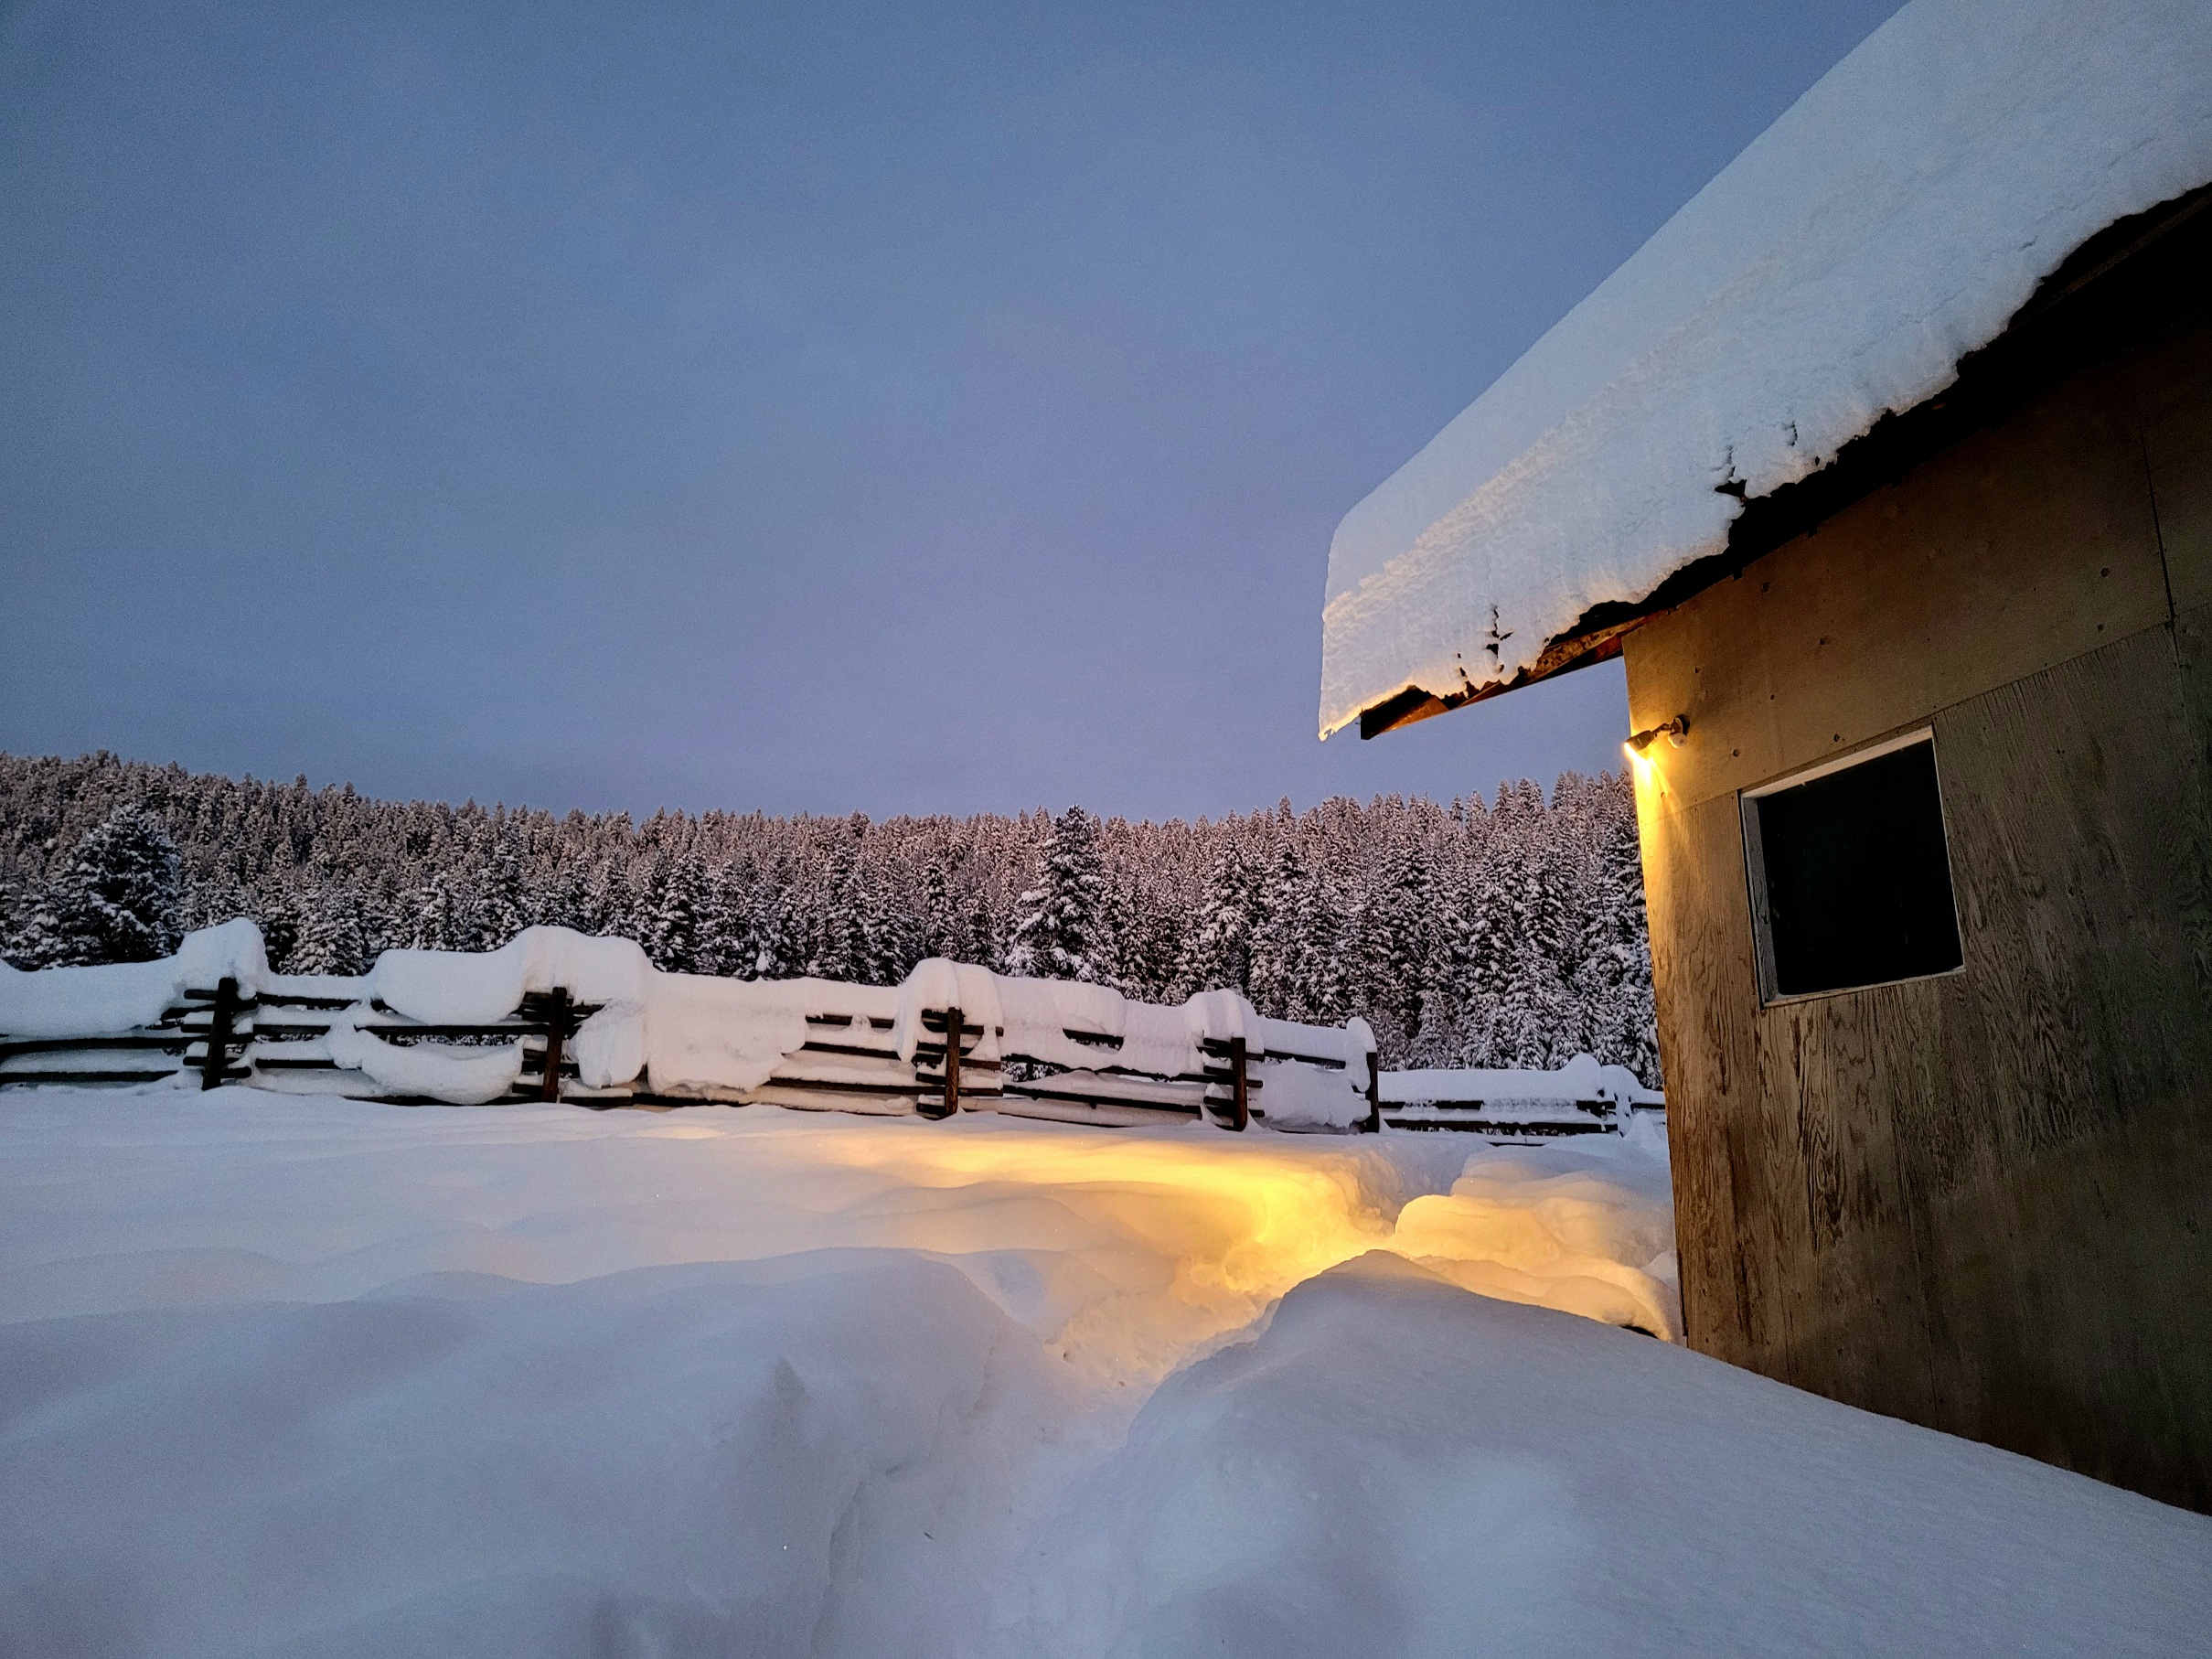 photo of the edge of a barn in heavy snow, getting close to dark, with a single light glowing on the snow